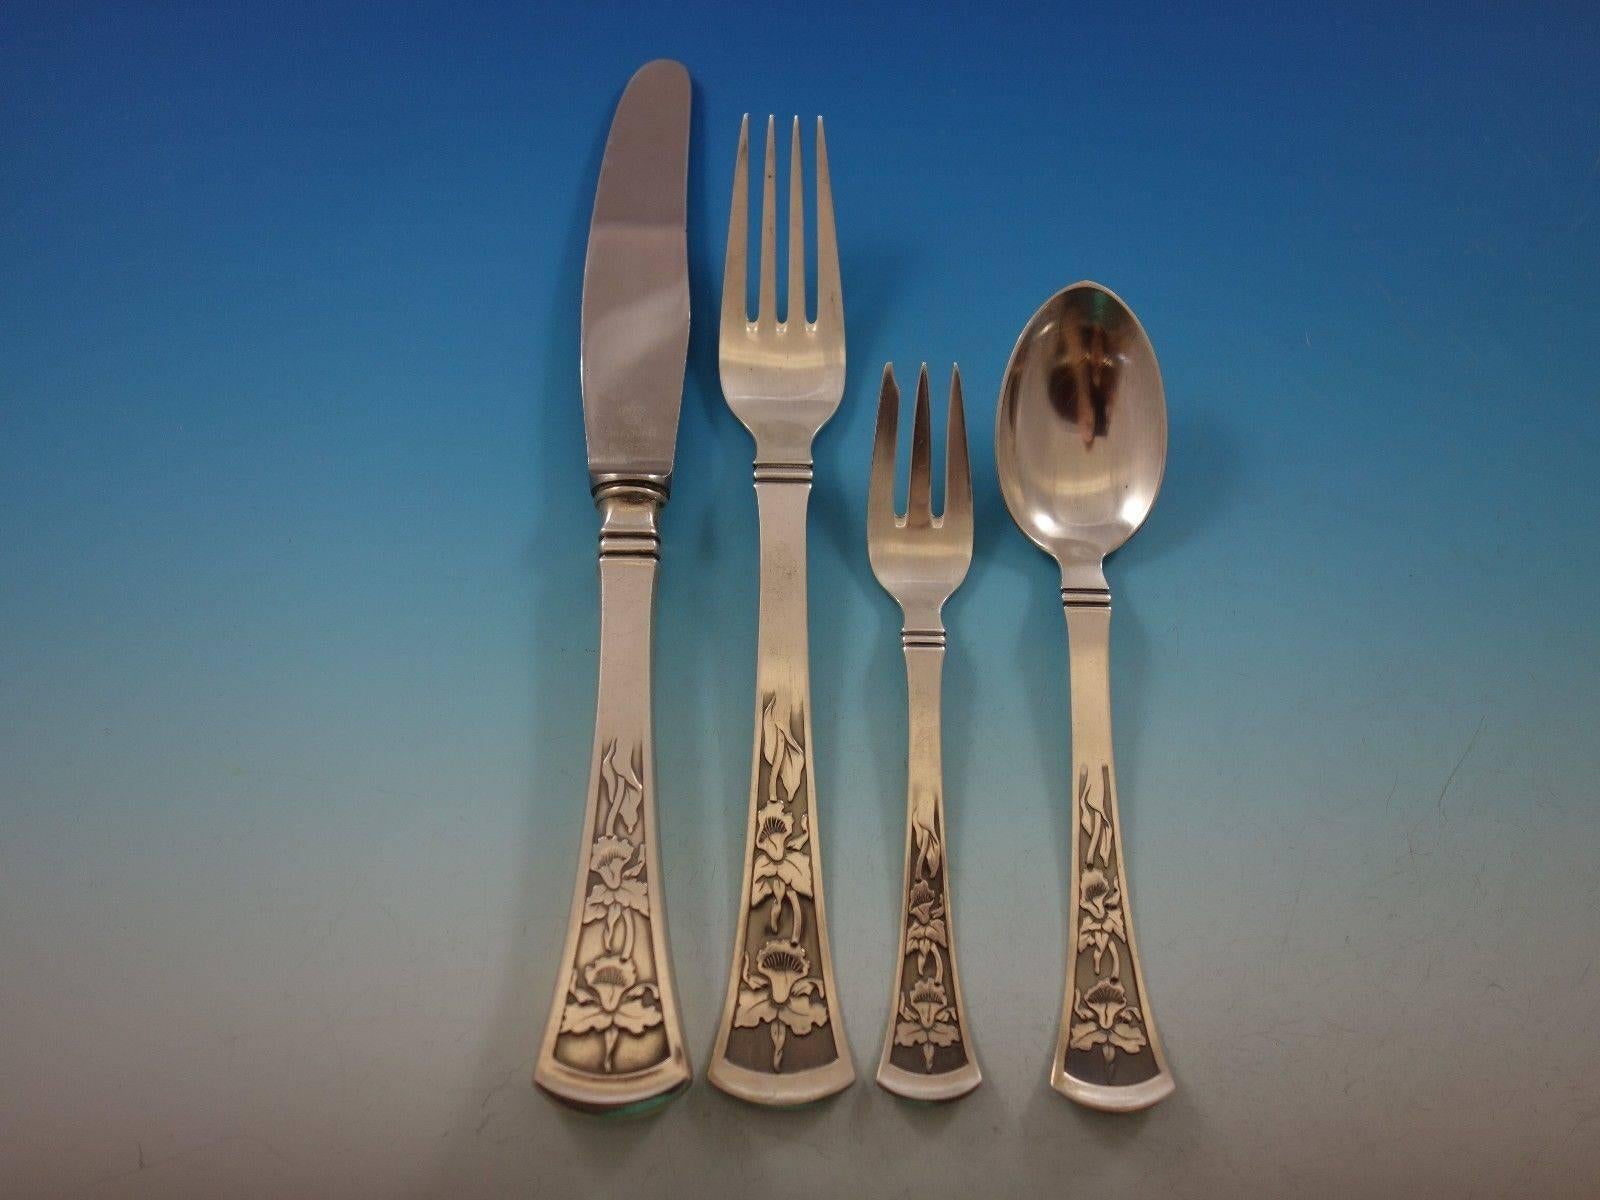 Orchide aka Orchid by W & S Sorensen sterling silver flatware set, 48 pieces. This set includes:

Eight dinner knives, 8 5/8